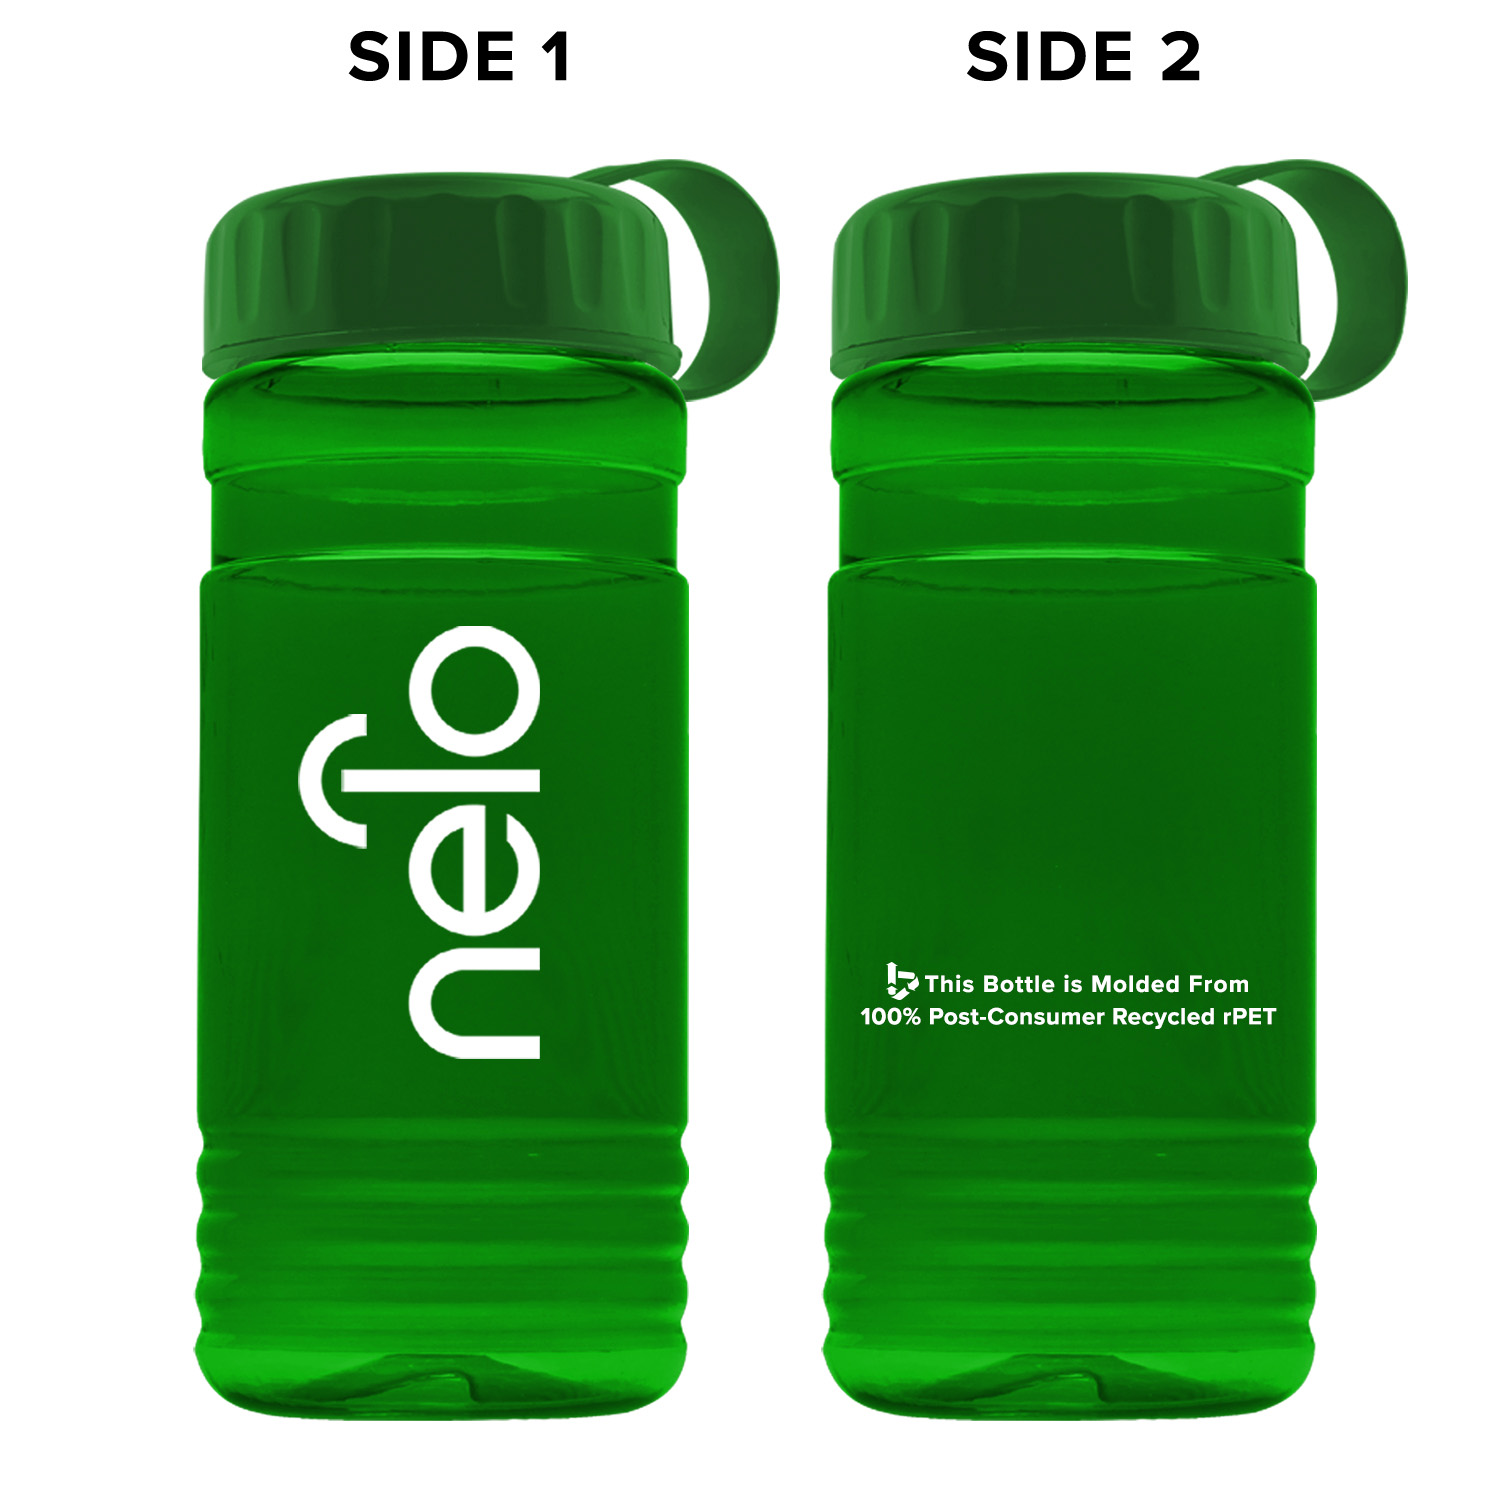 Post-consumer recycled PETE bottle